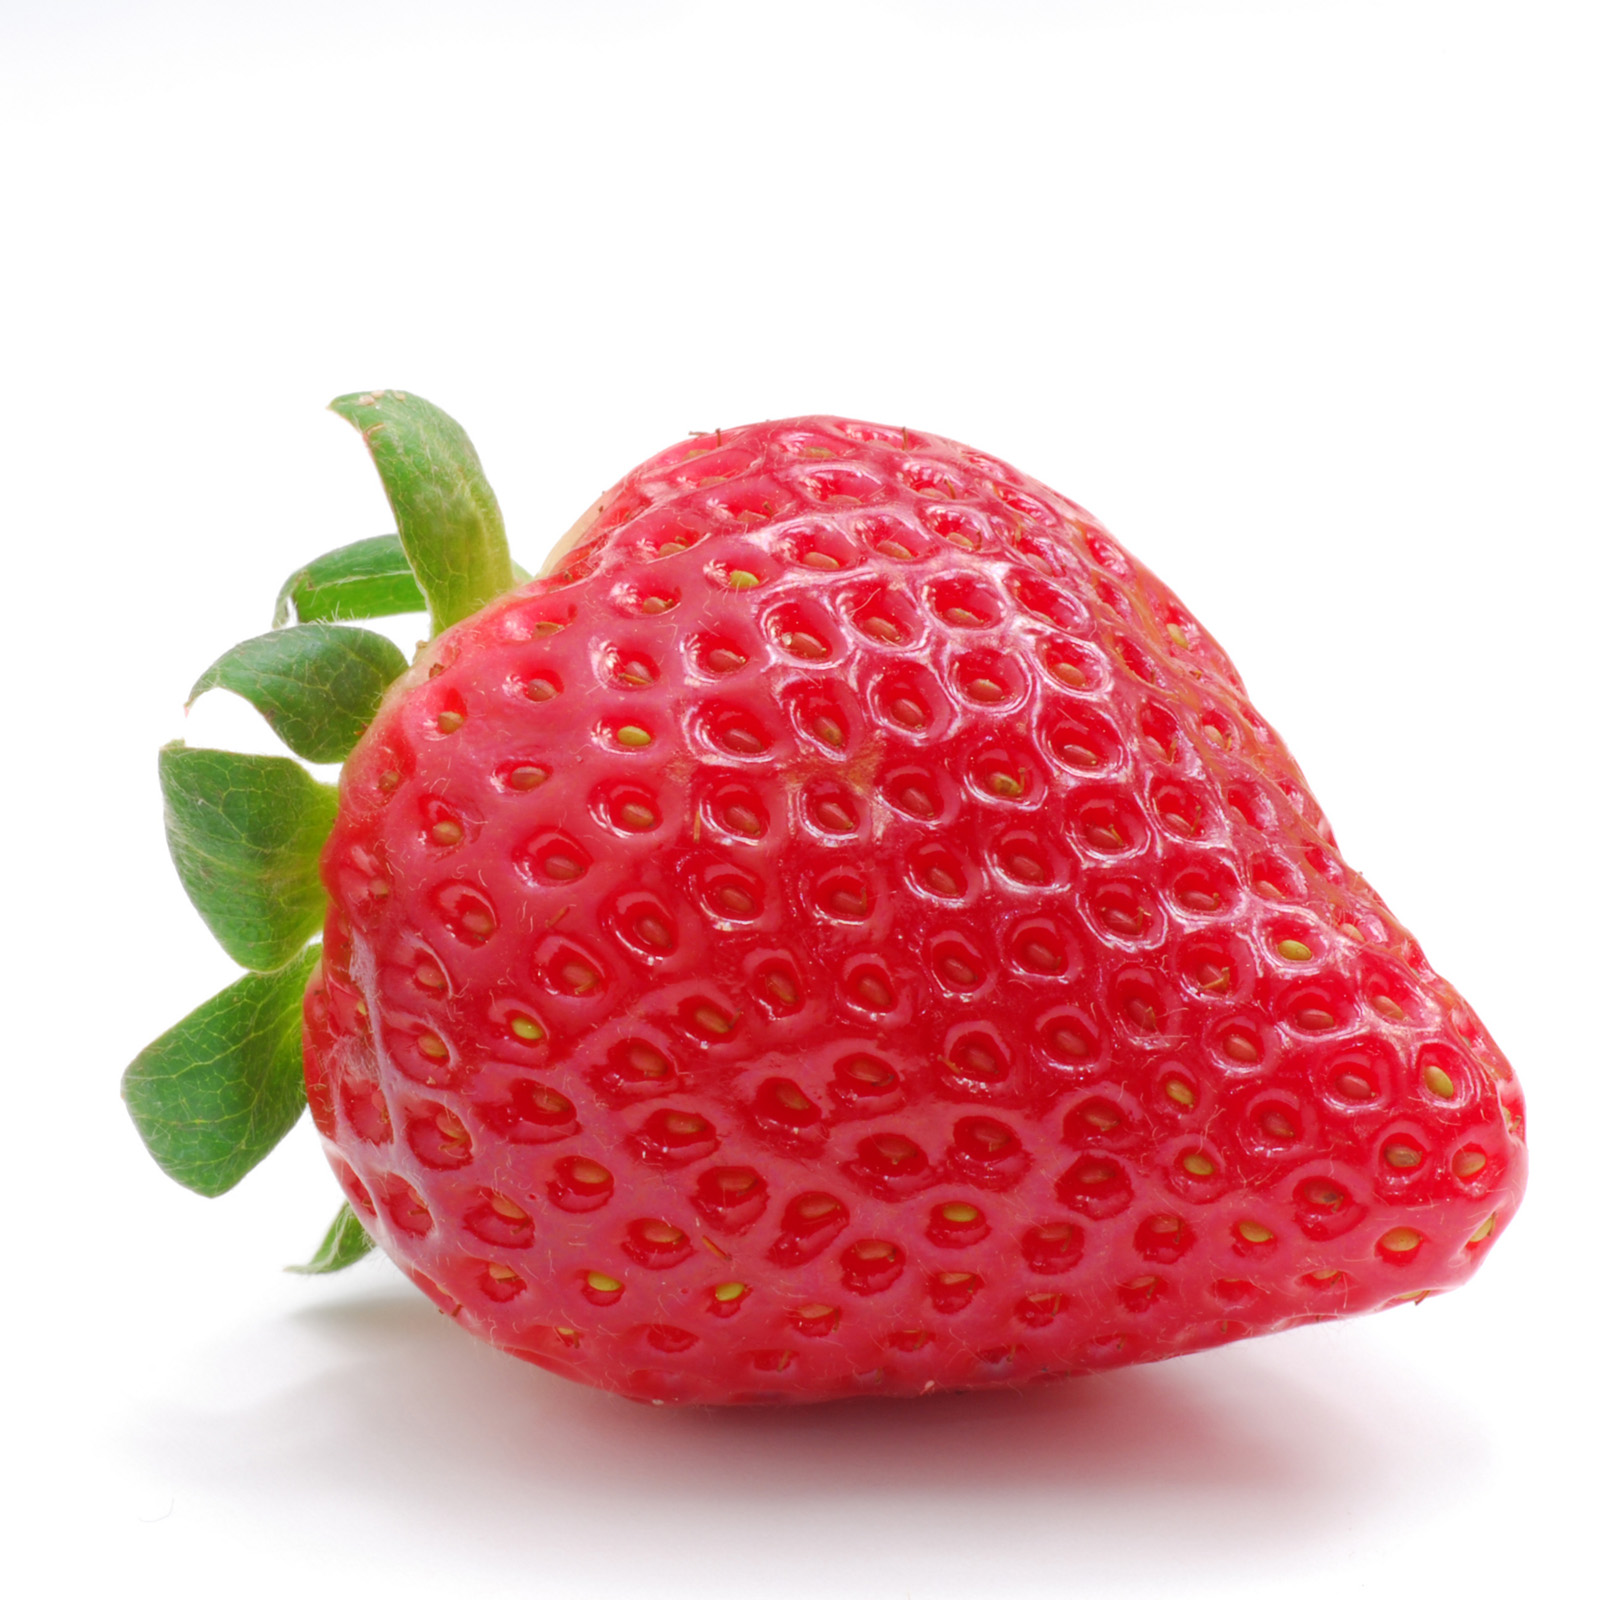 Strawberry close-up high-definition 7111 - Fruits and vegetables ...